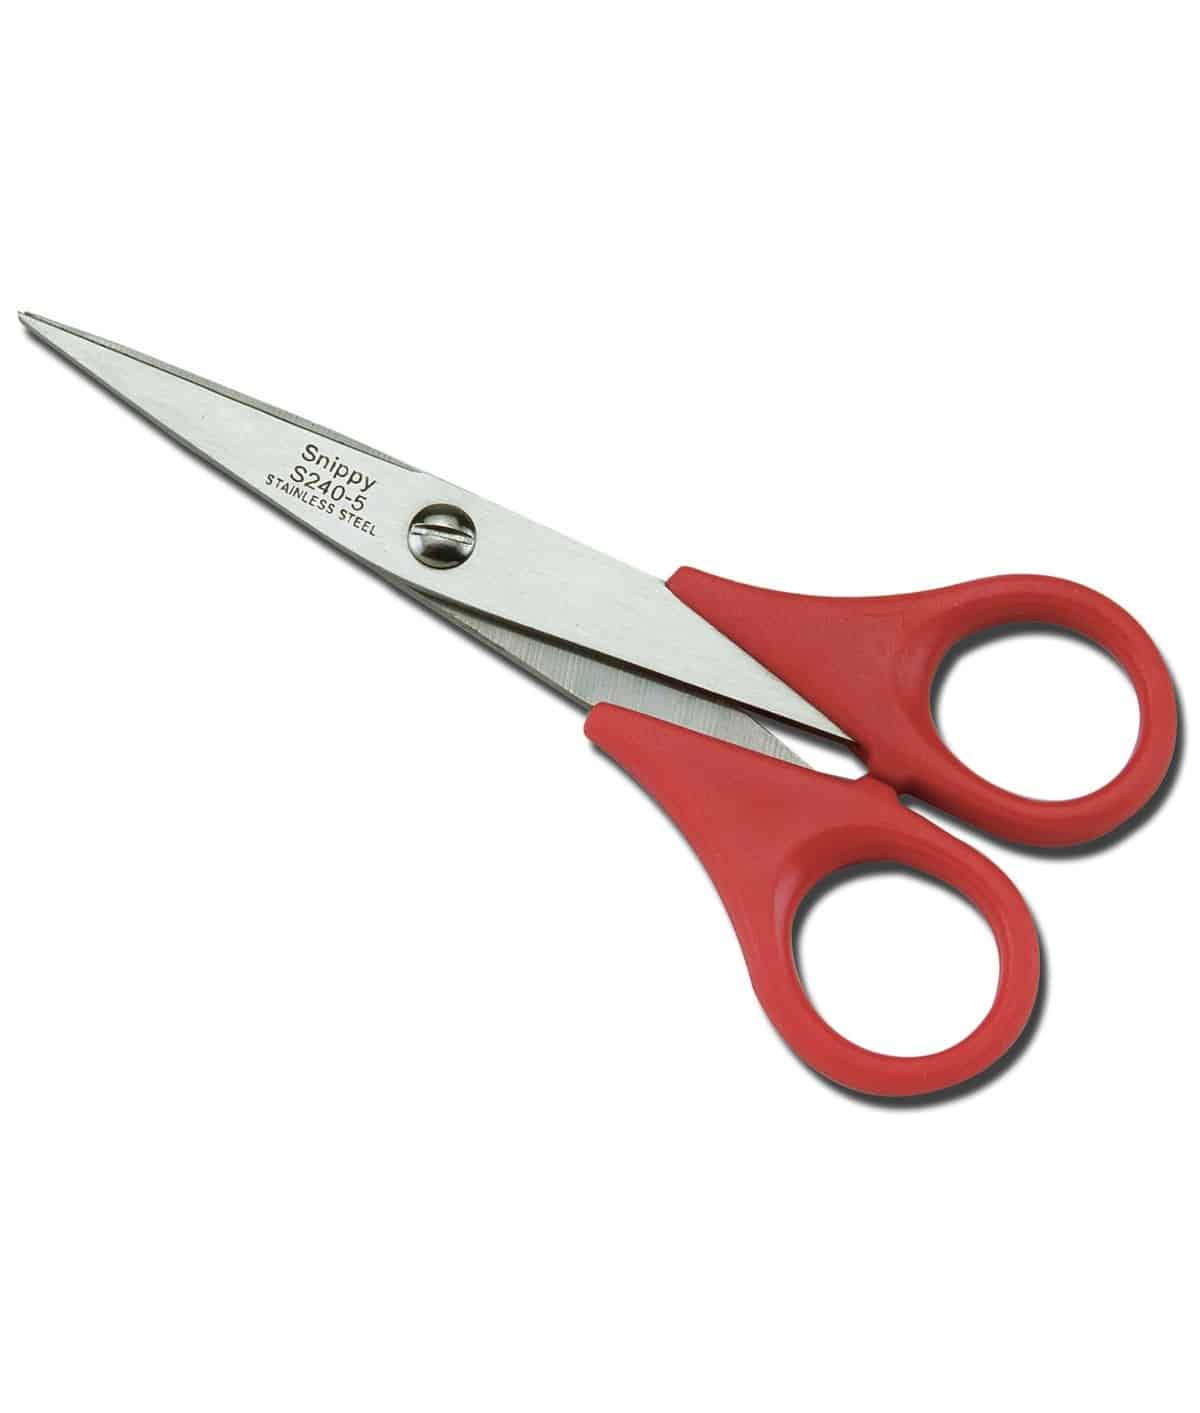 Snippy® 5″ Scissors - Pointed Tip